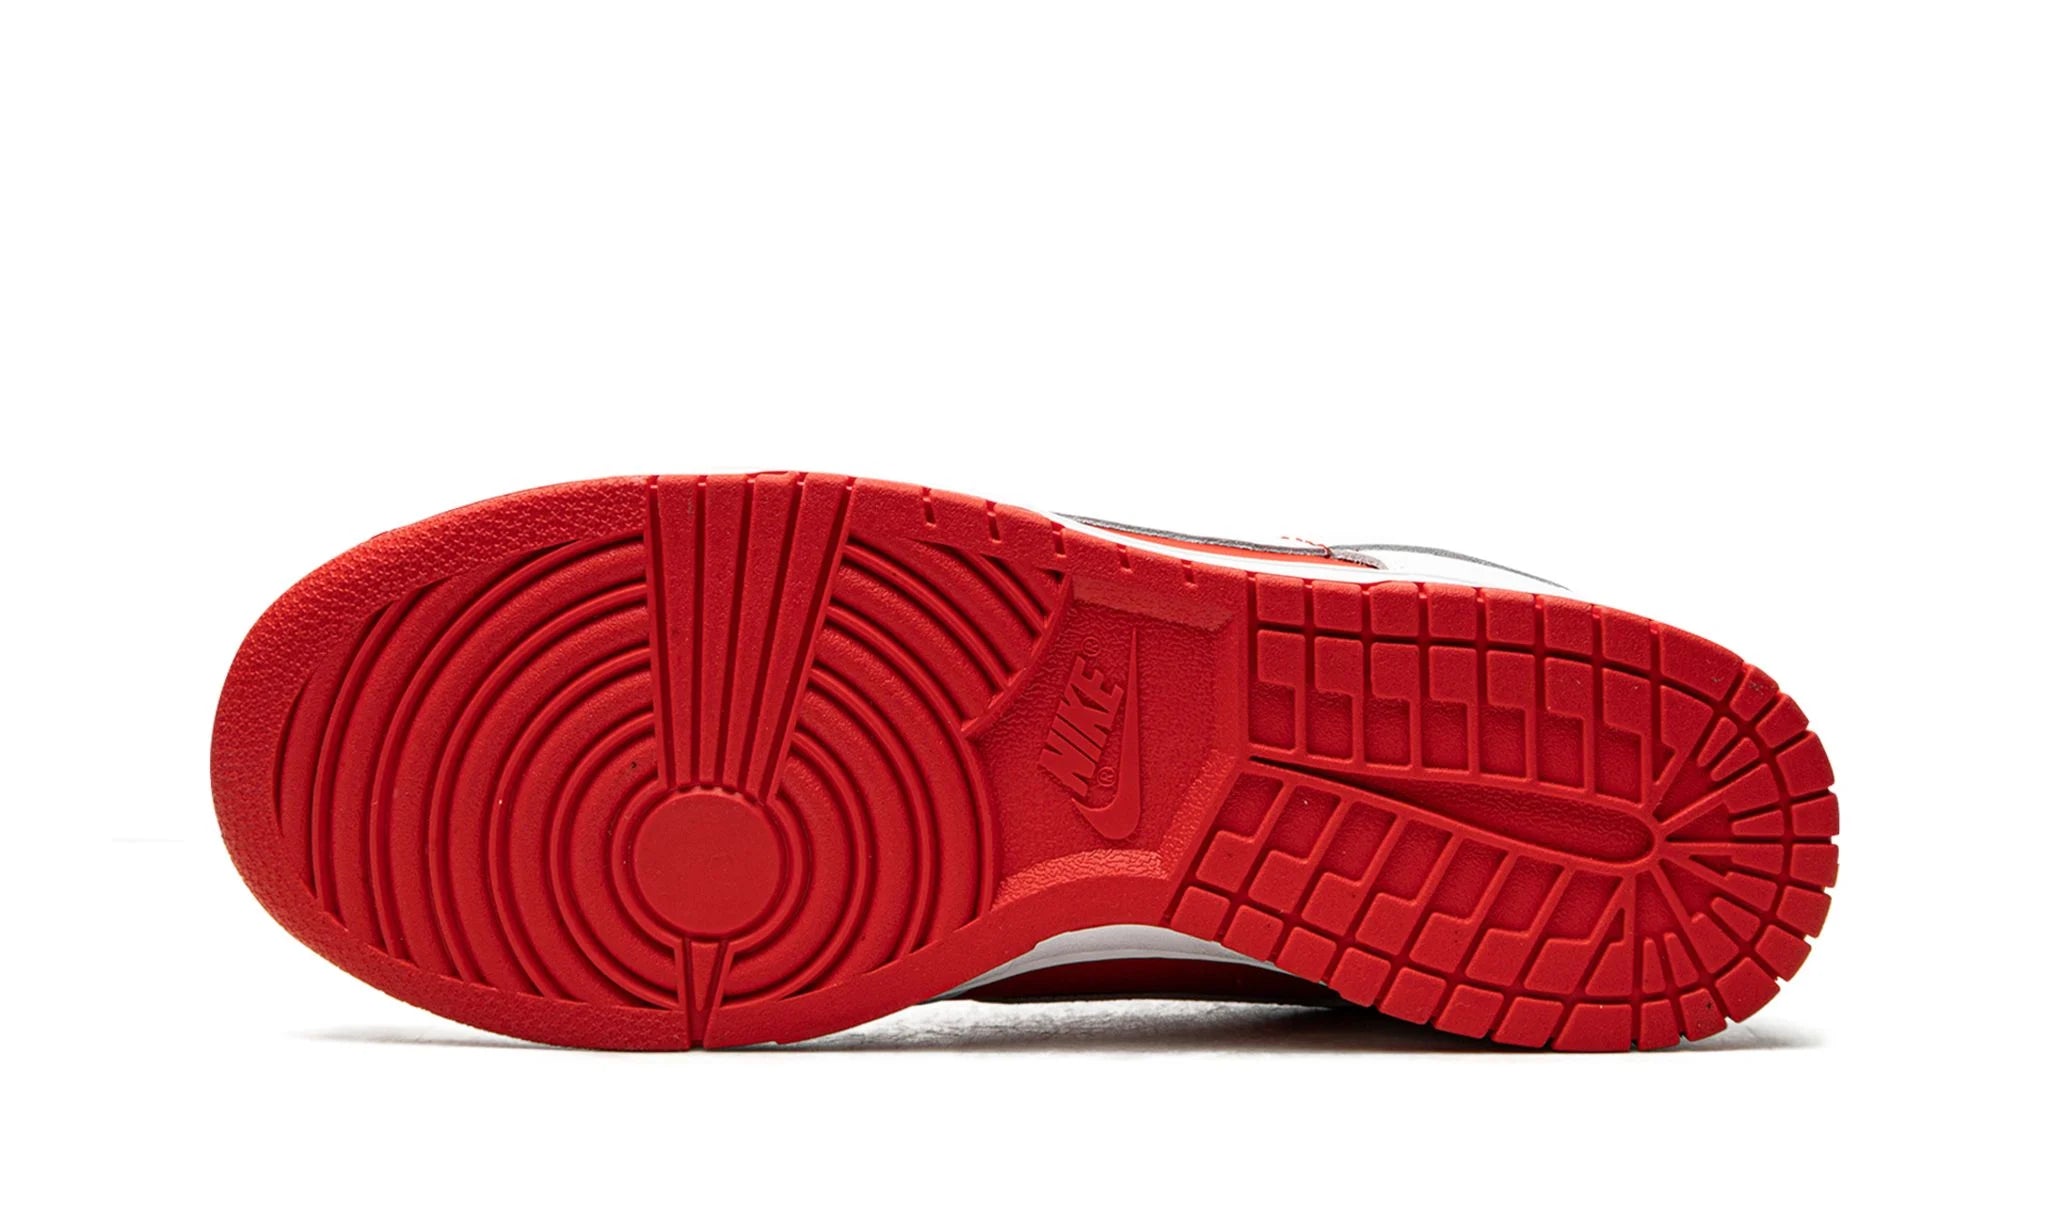 DUNK LOW "University Red 2021"